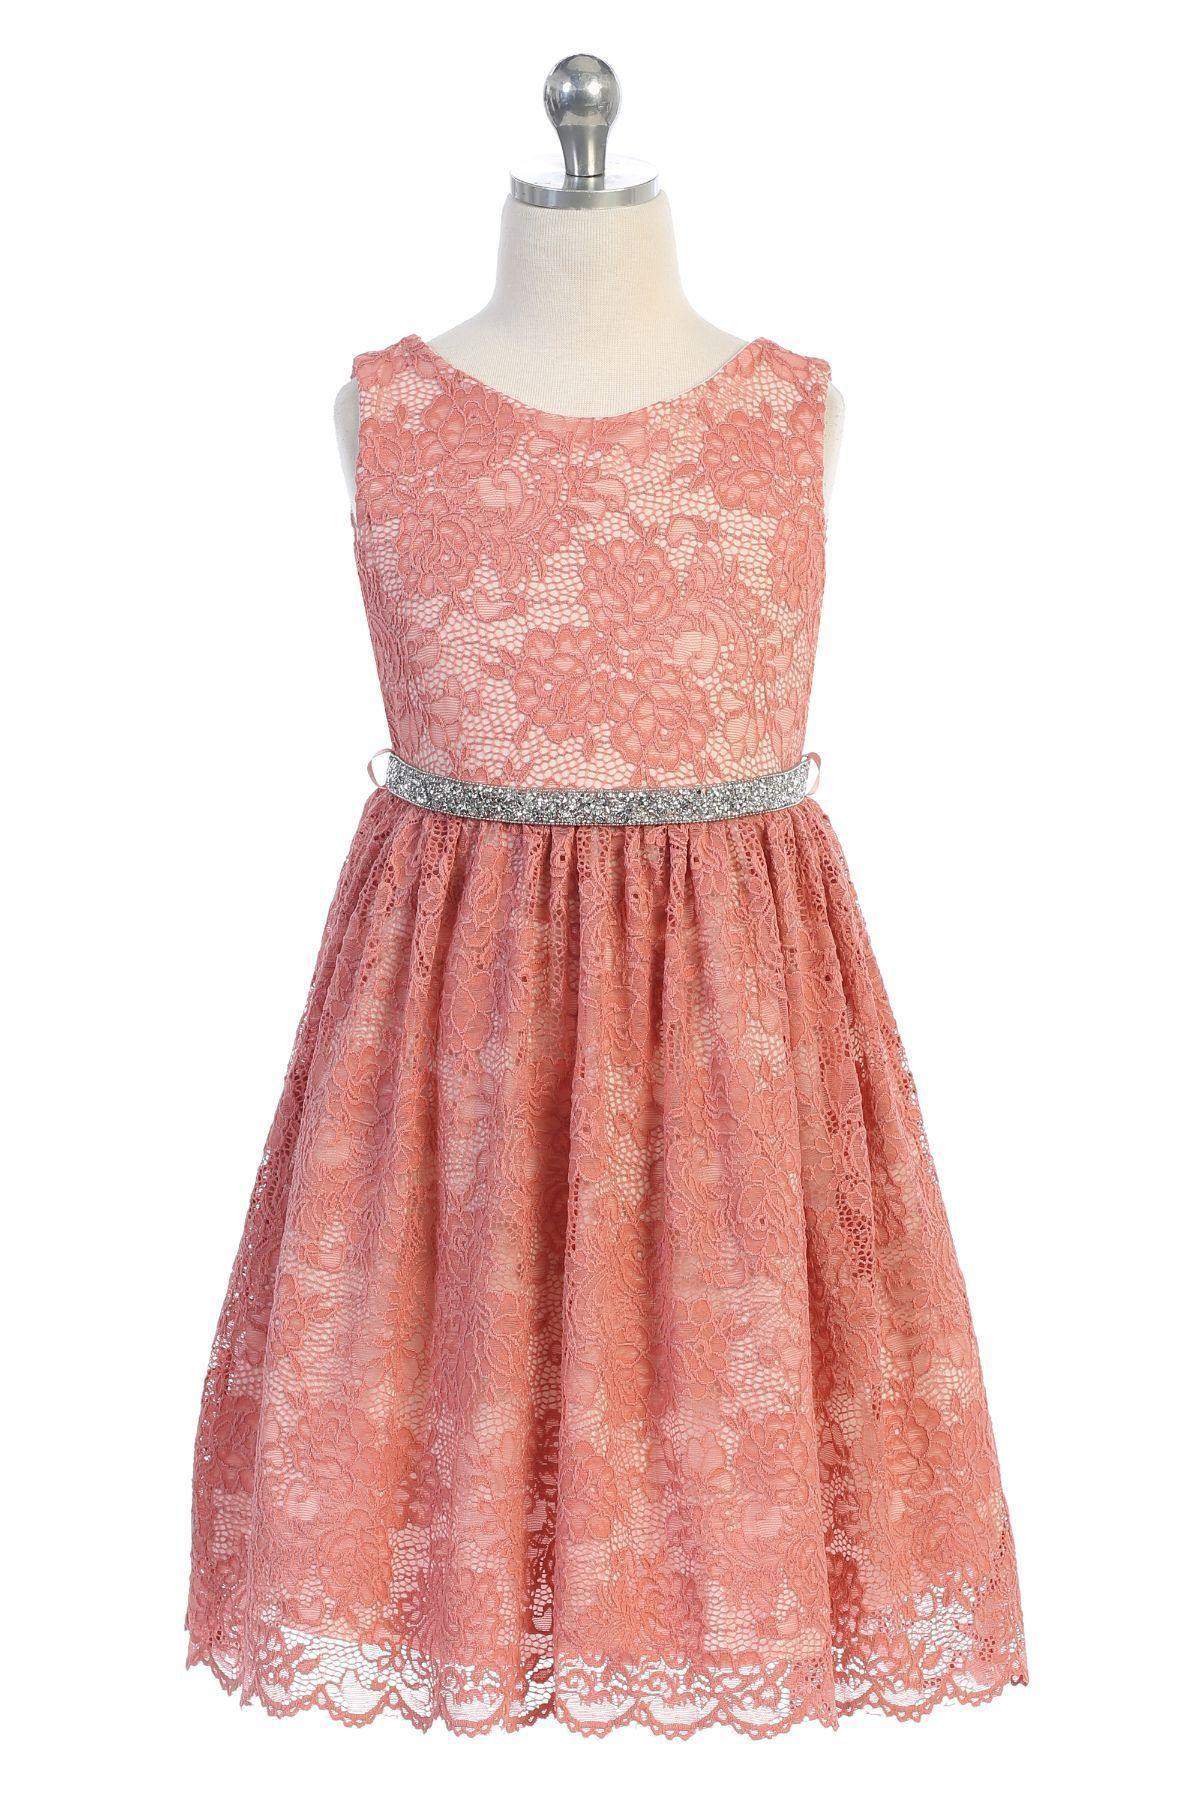 Stretch Lace Plus Size Girl Dress-Kid's Dream-color_Blush Pink,fabric_Lace,girl-dress,length_Knee Length,meta-related-collection-shop-the-outfit-girls,Pink-collection,size_14.5,size_16.5,size_18.5,size_20.5